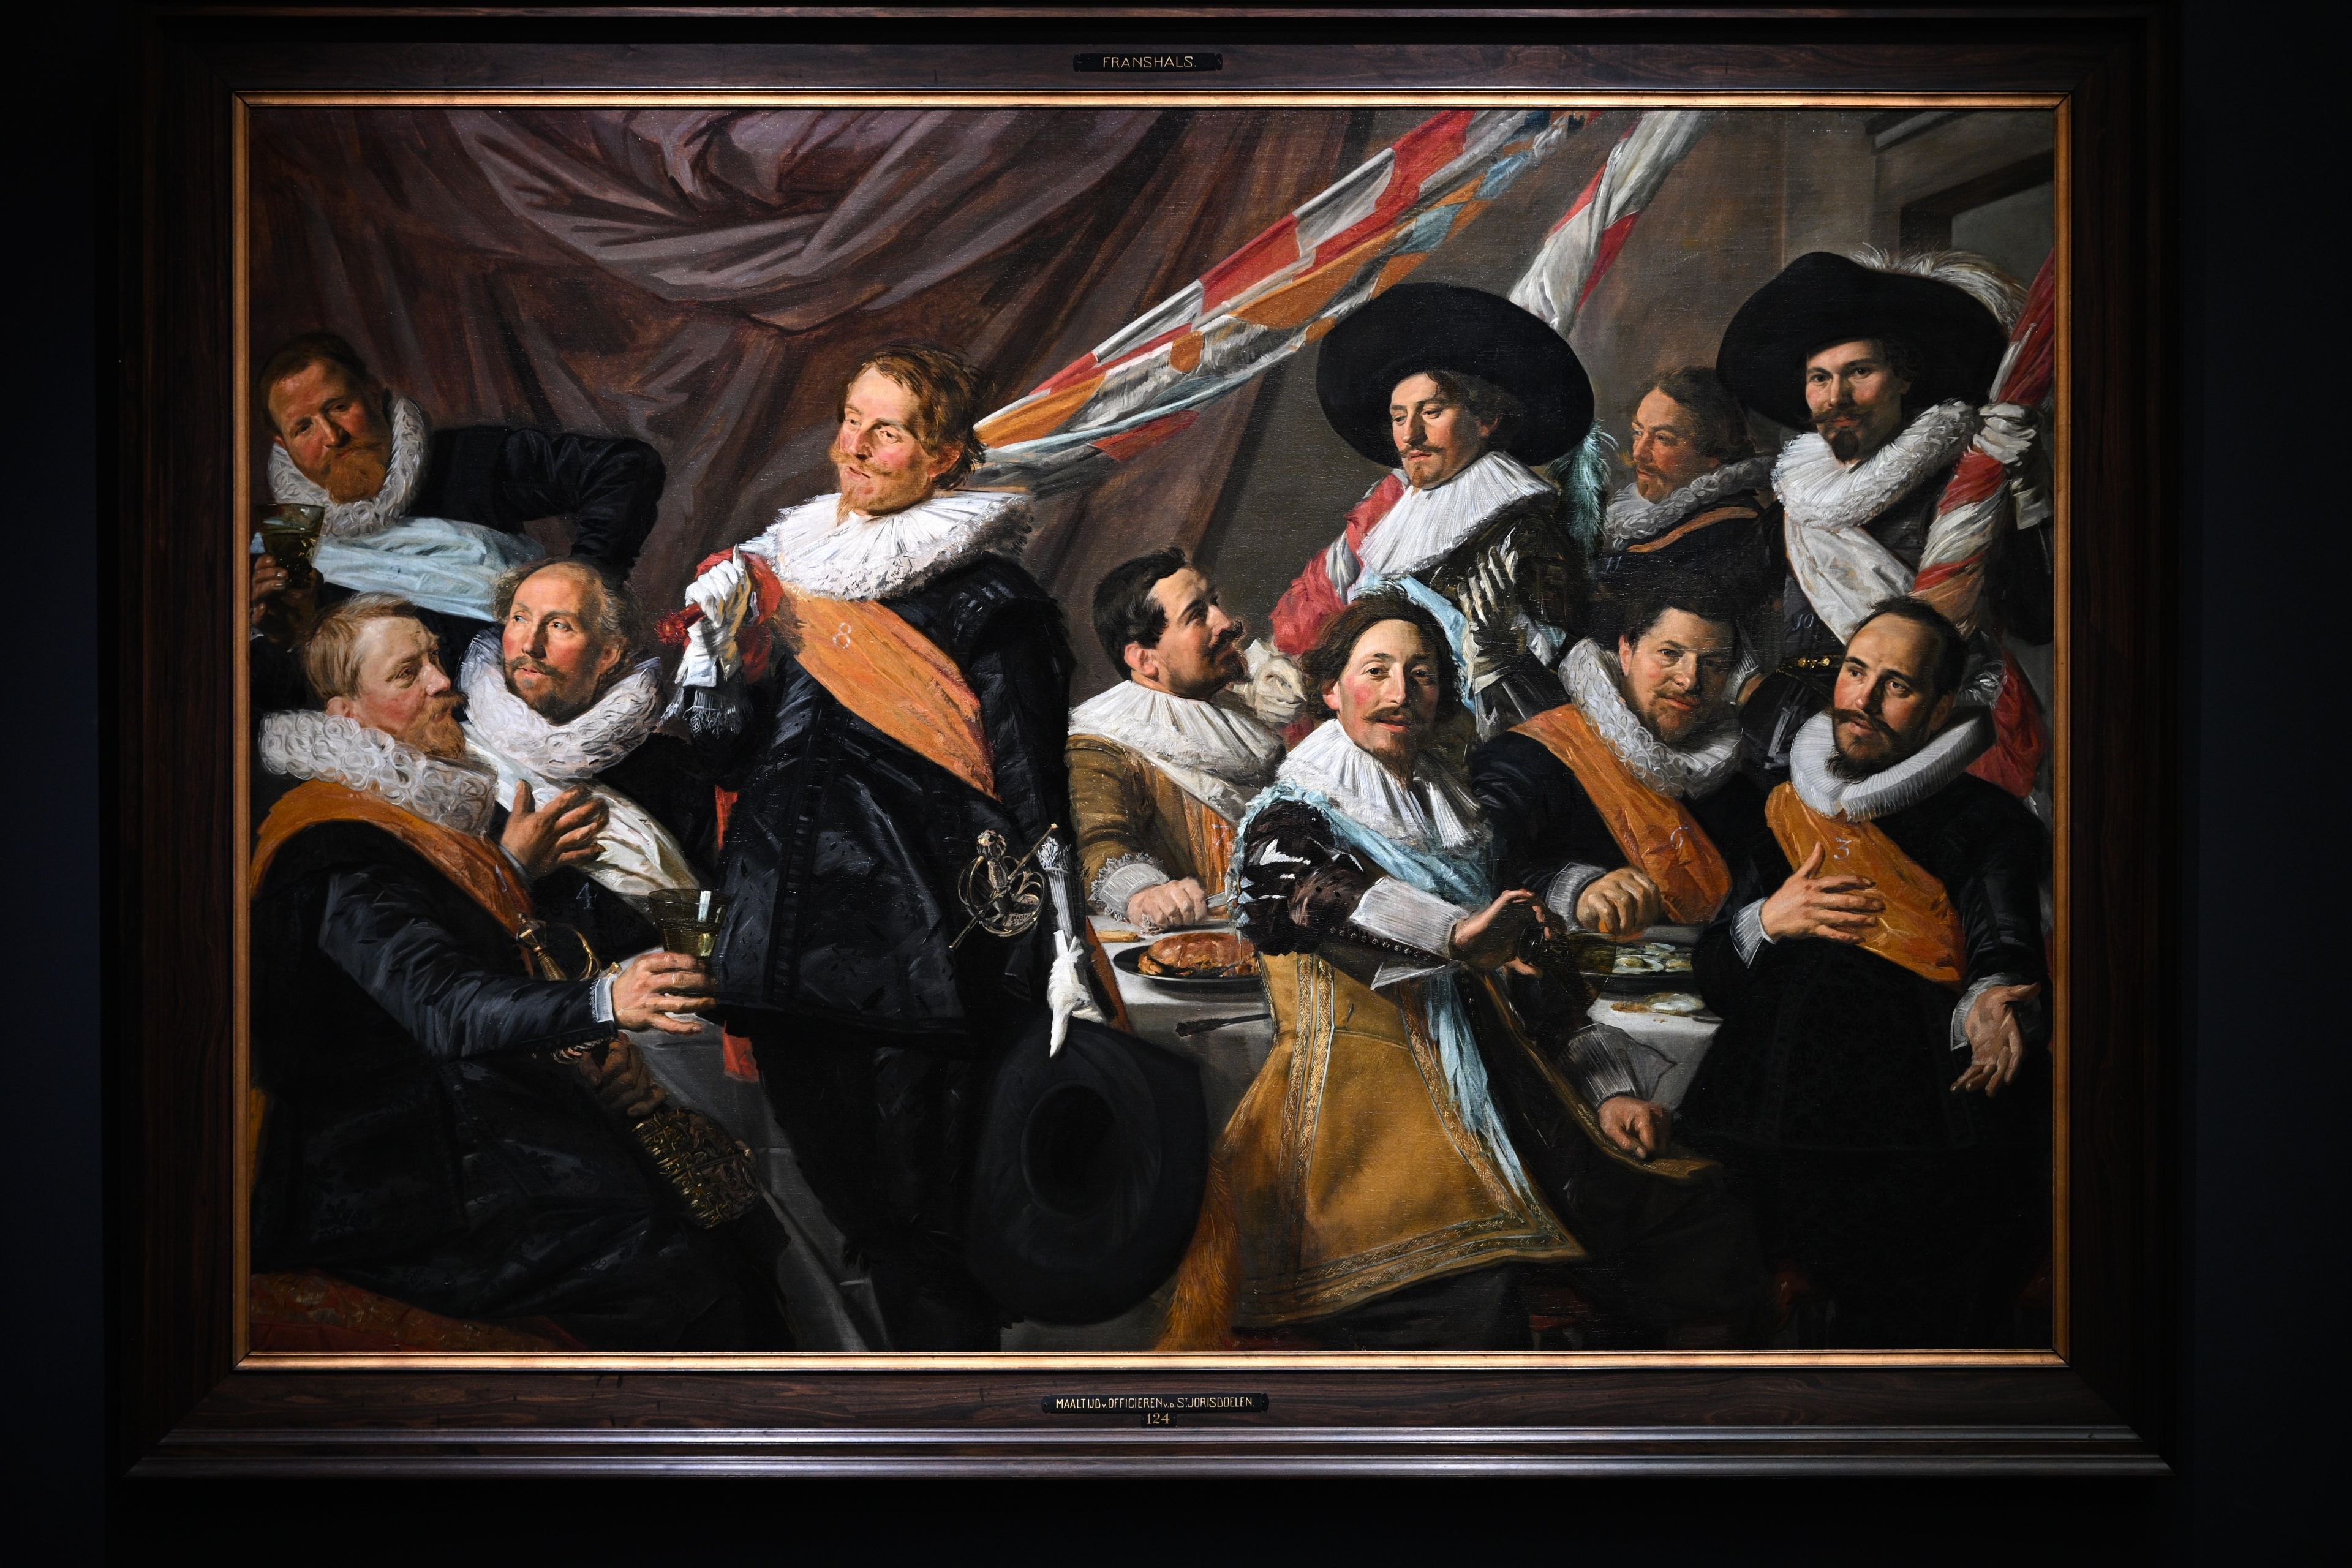 Frans Hals, ‘Banquet of the Officers of the St George Civic Guard’ (1627), Frans Hals Museum, Haarlem 